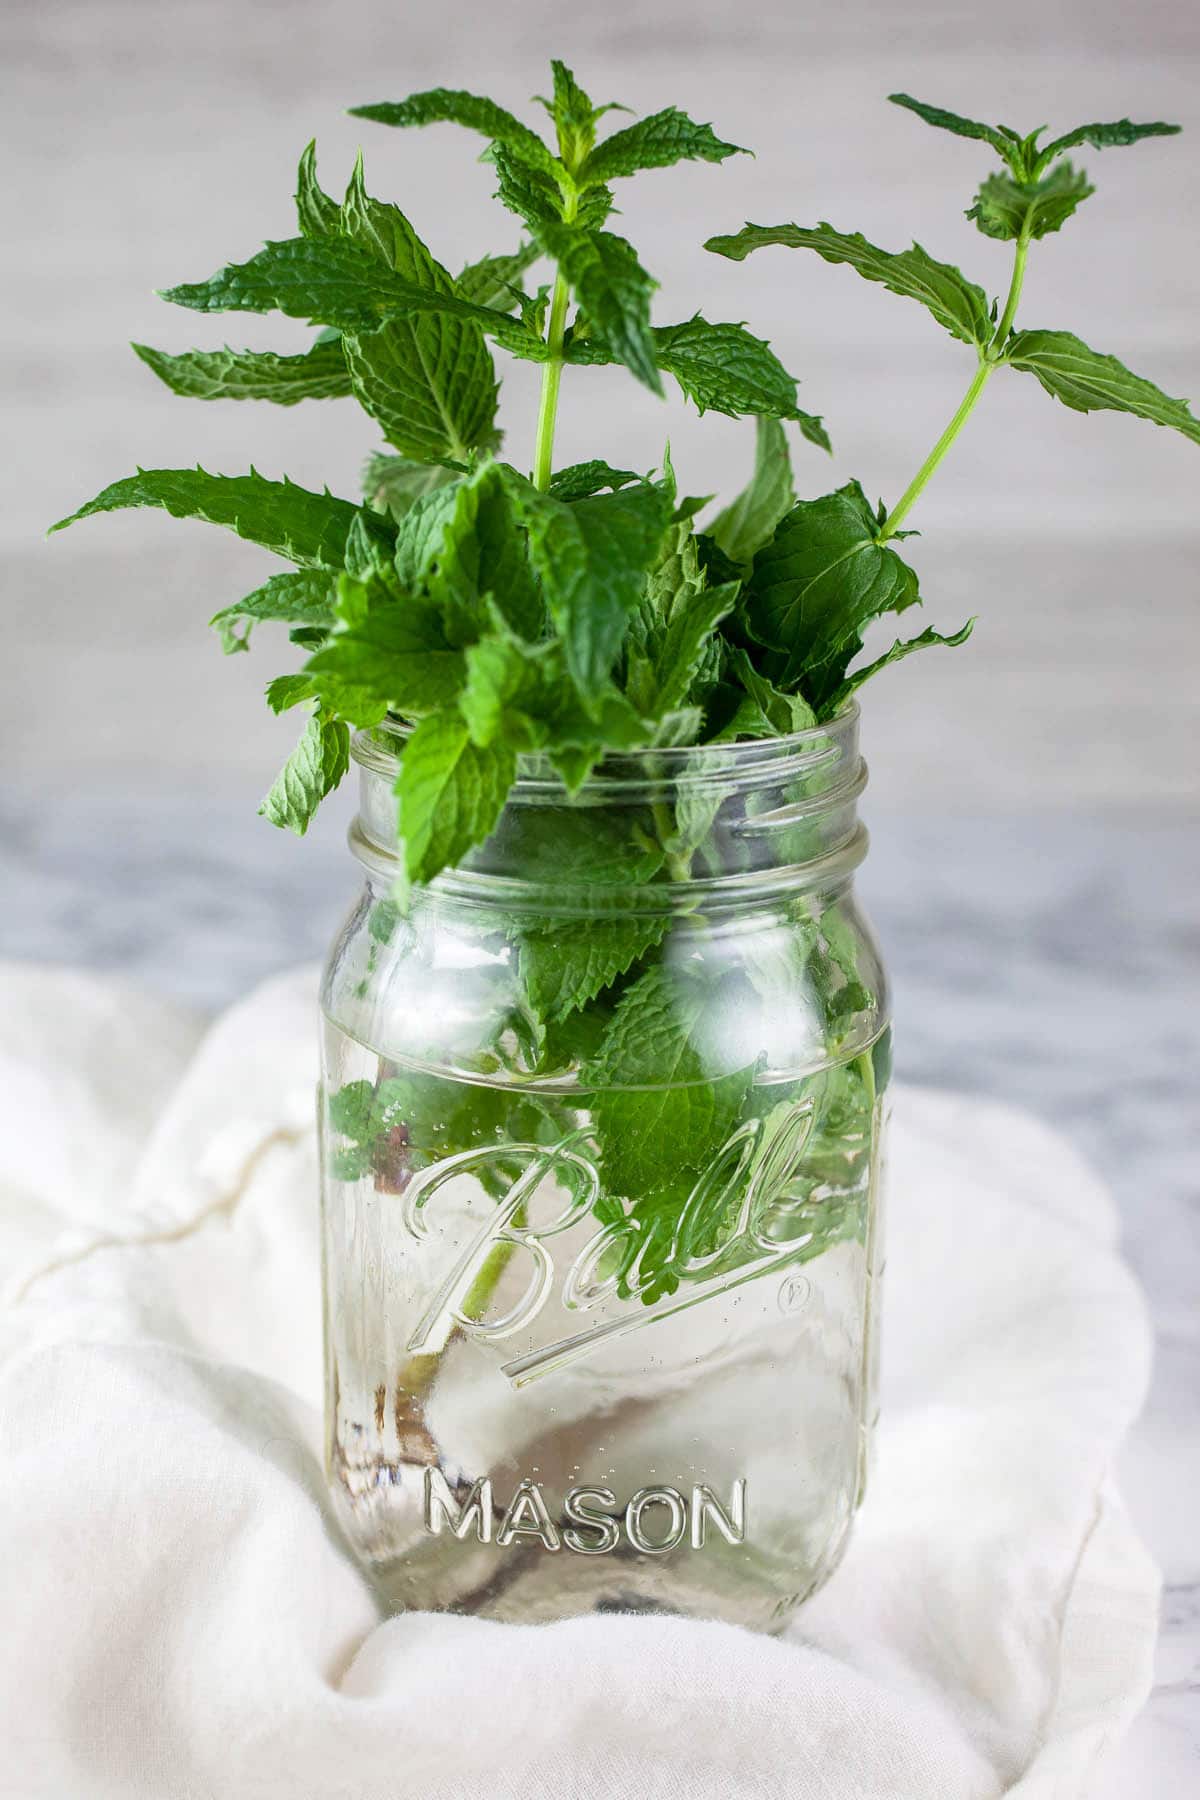 Fresh mint sprigs in mason jar with water on white towel.